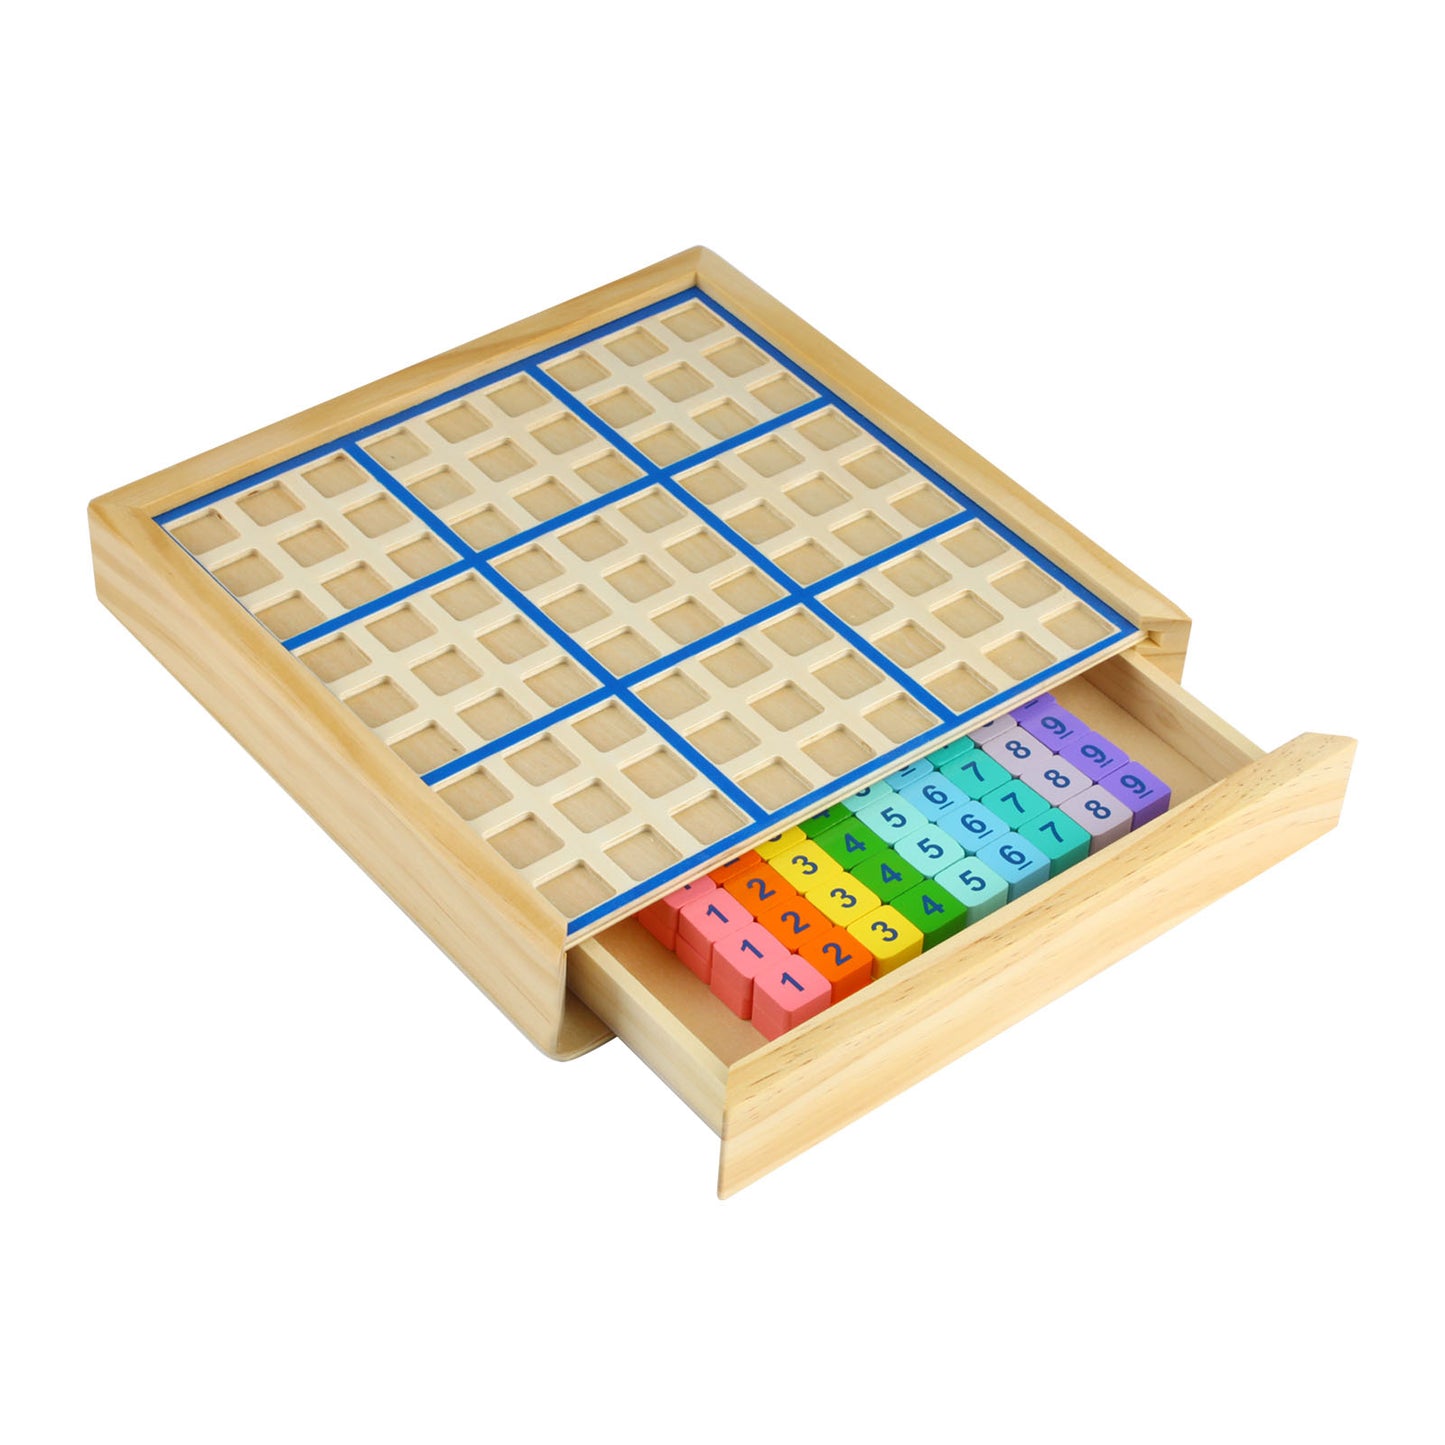 Andux Wooden Sudoku Puzzle (Colorful) SD-08 (Blue)